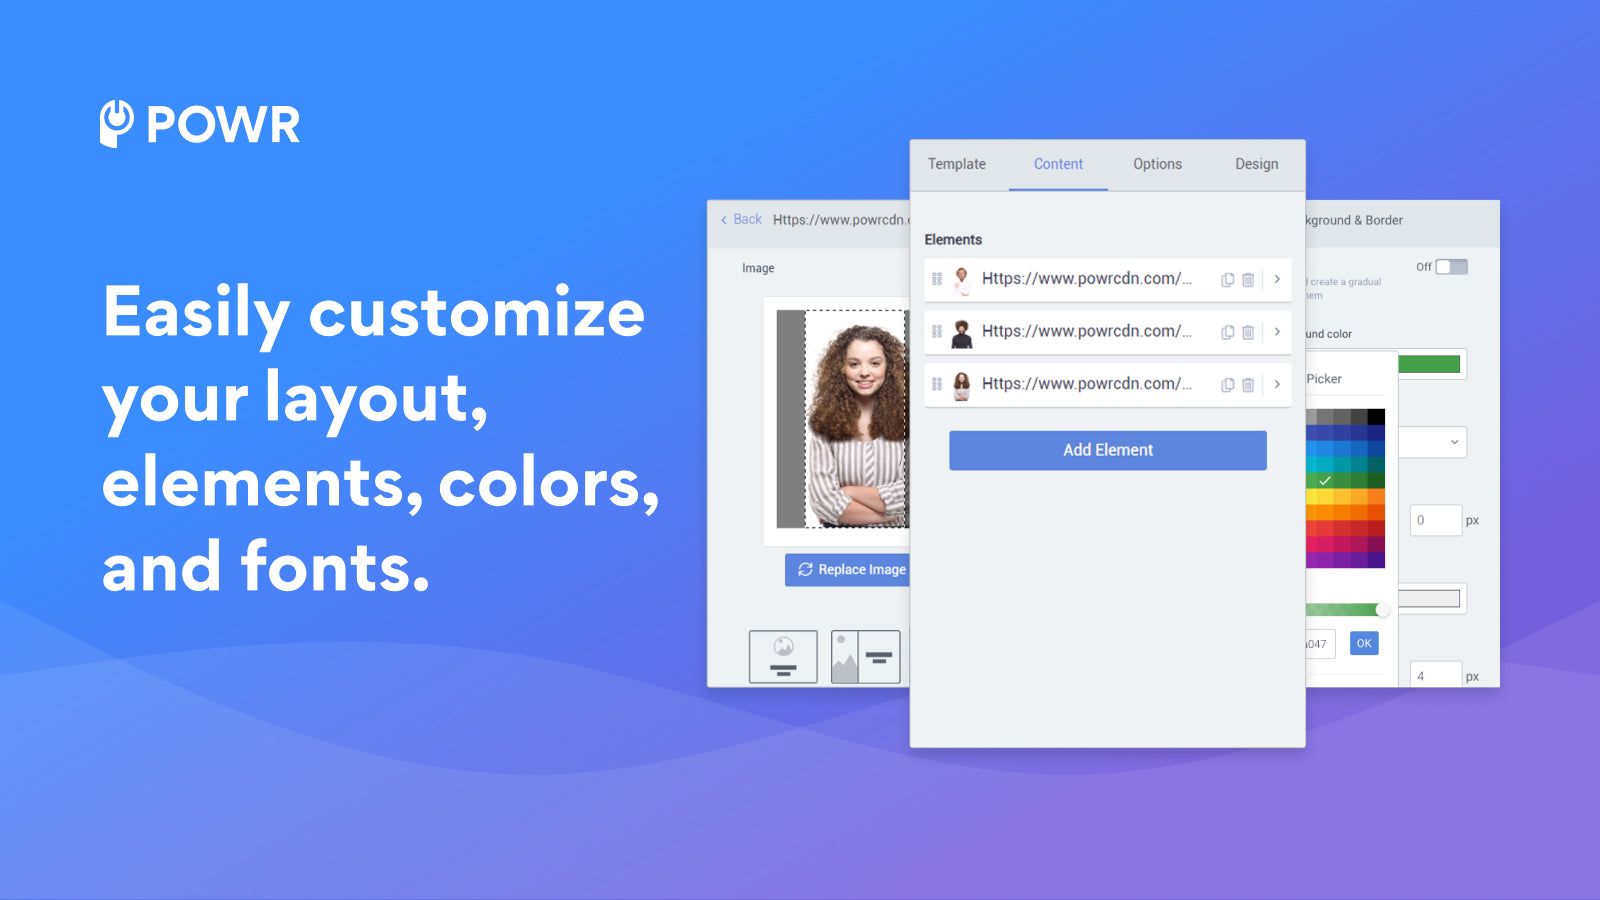 Customize your layout, elements, colors and fonts.